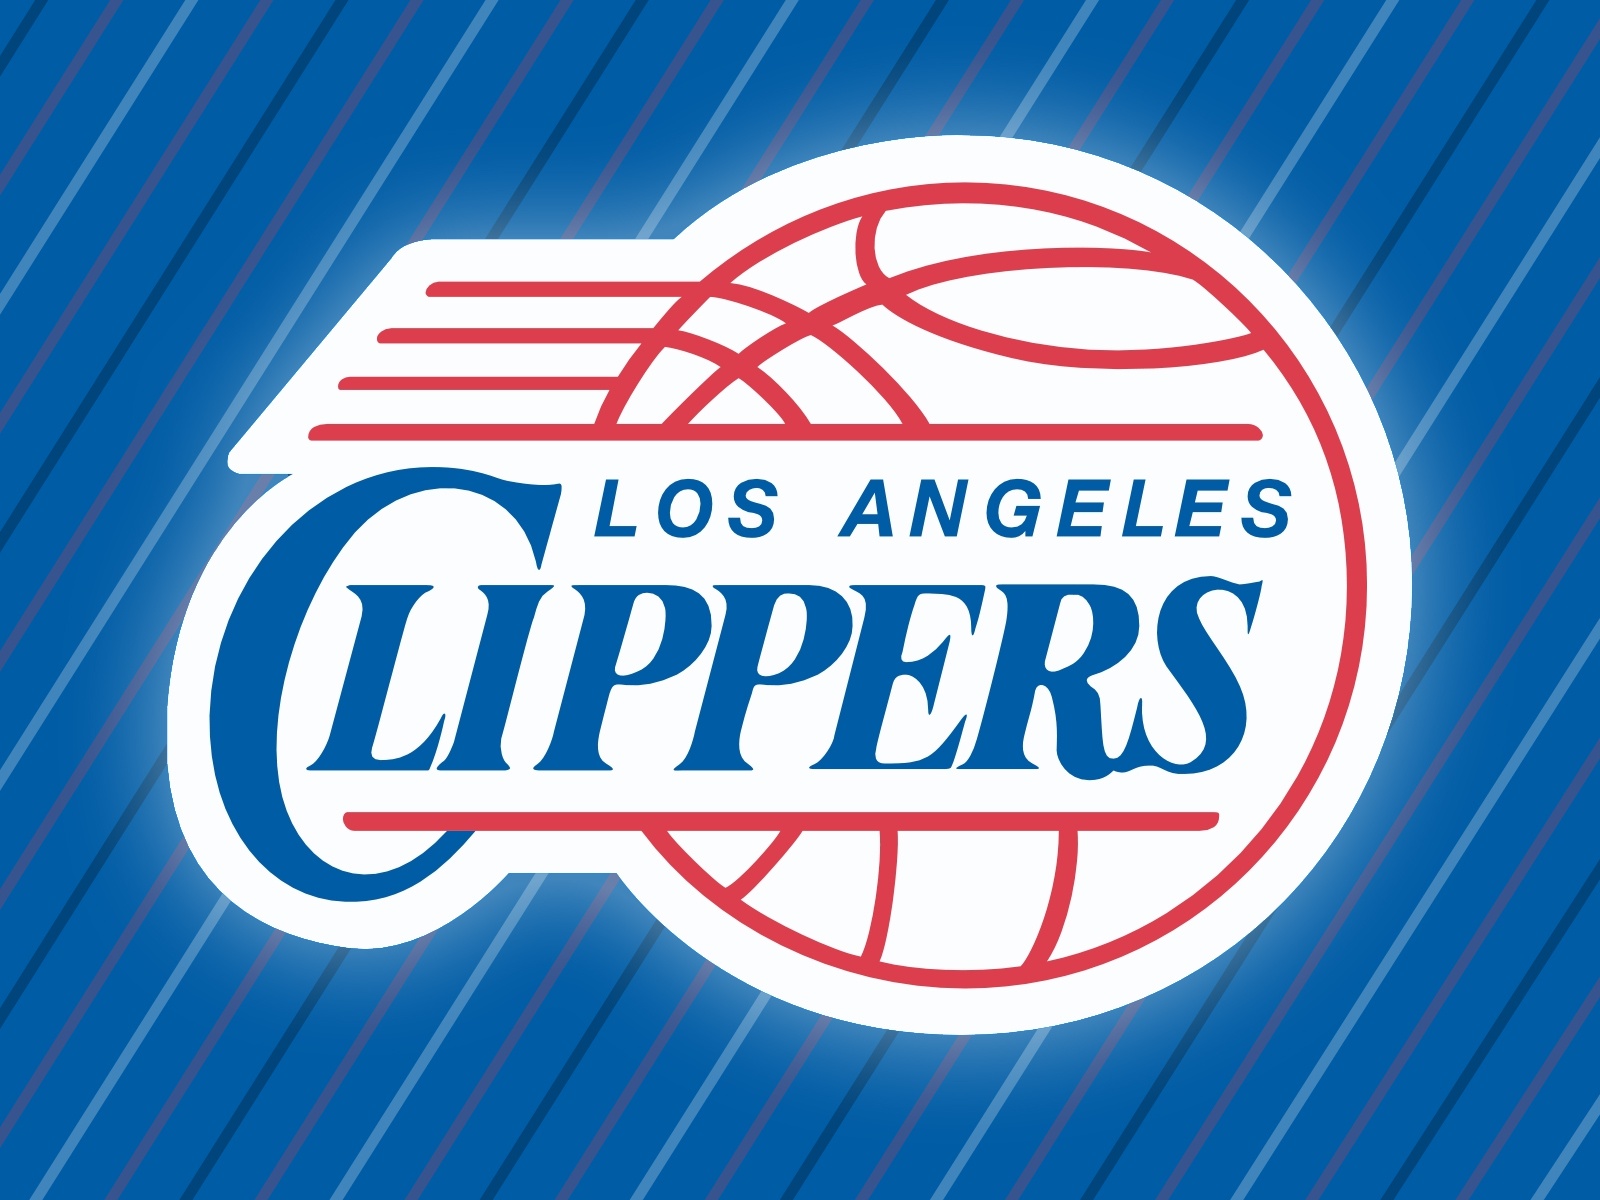 Los Angeles Clippers Wallpaper - Los Angeles Clippers Logo , HD Wallpaper & Backgrounds